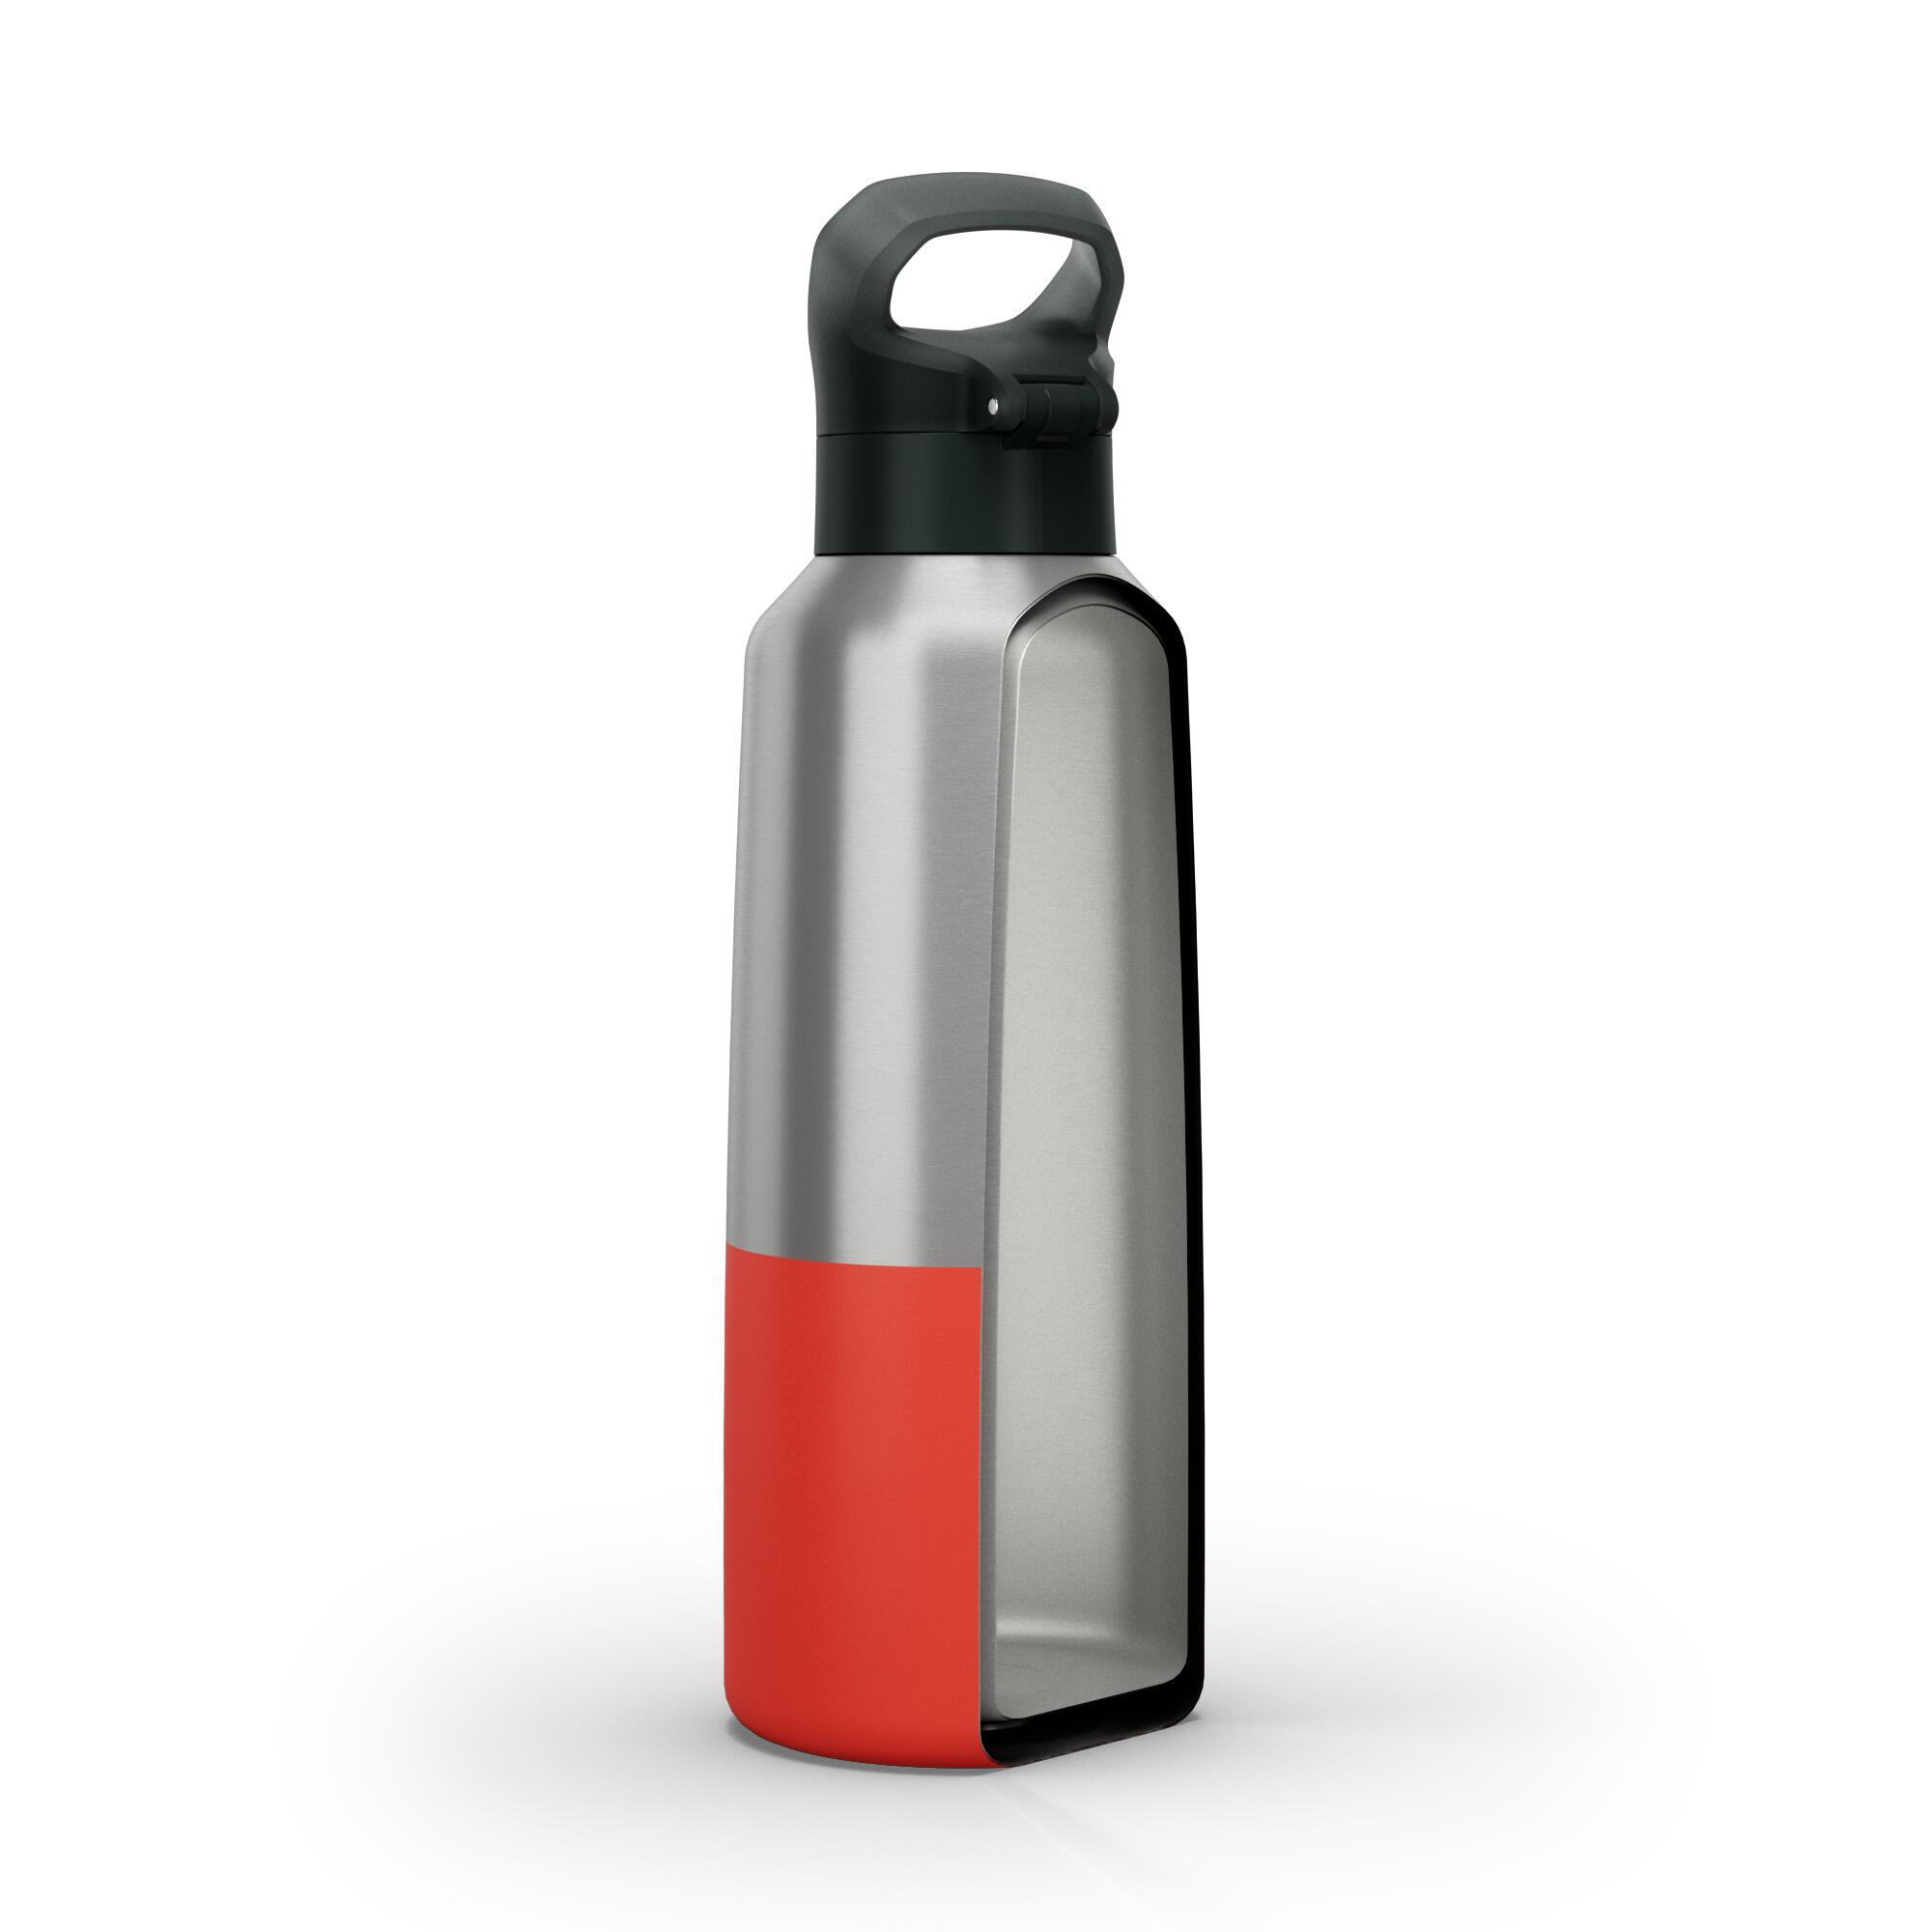 0.8 L stainless steel water bottle with quick-open cap for hiking - Red 20/35